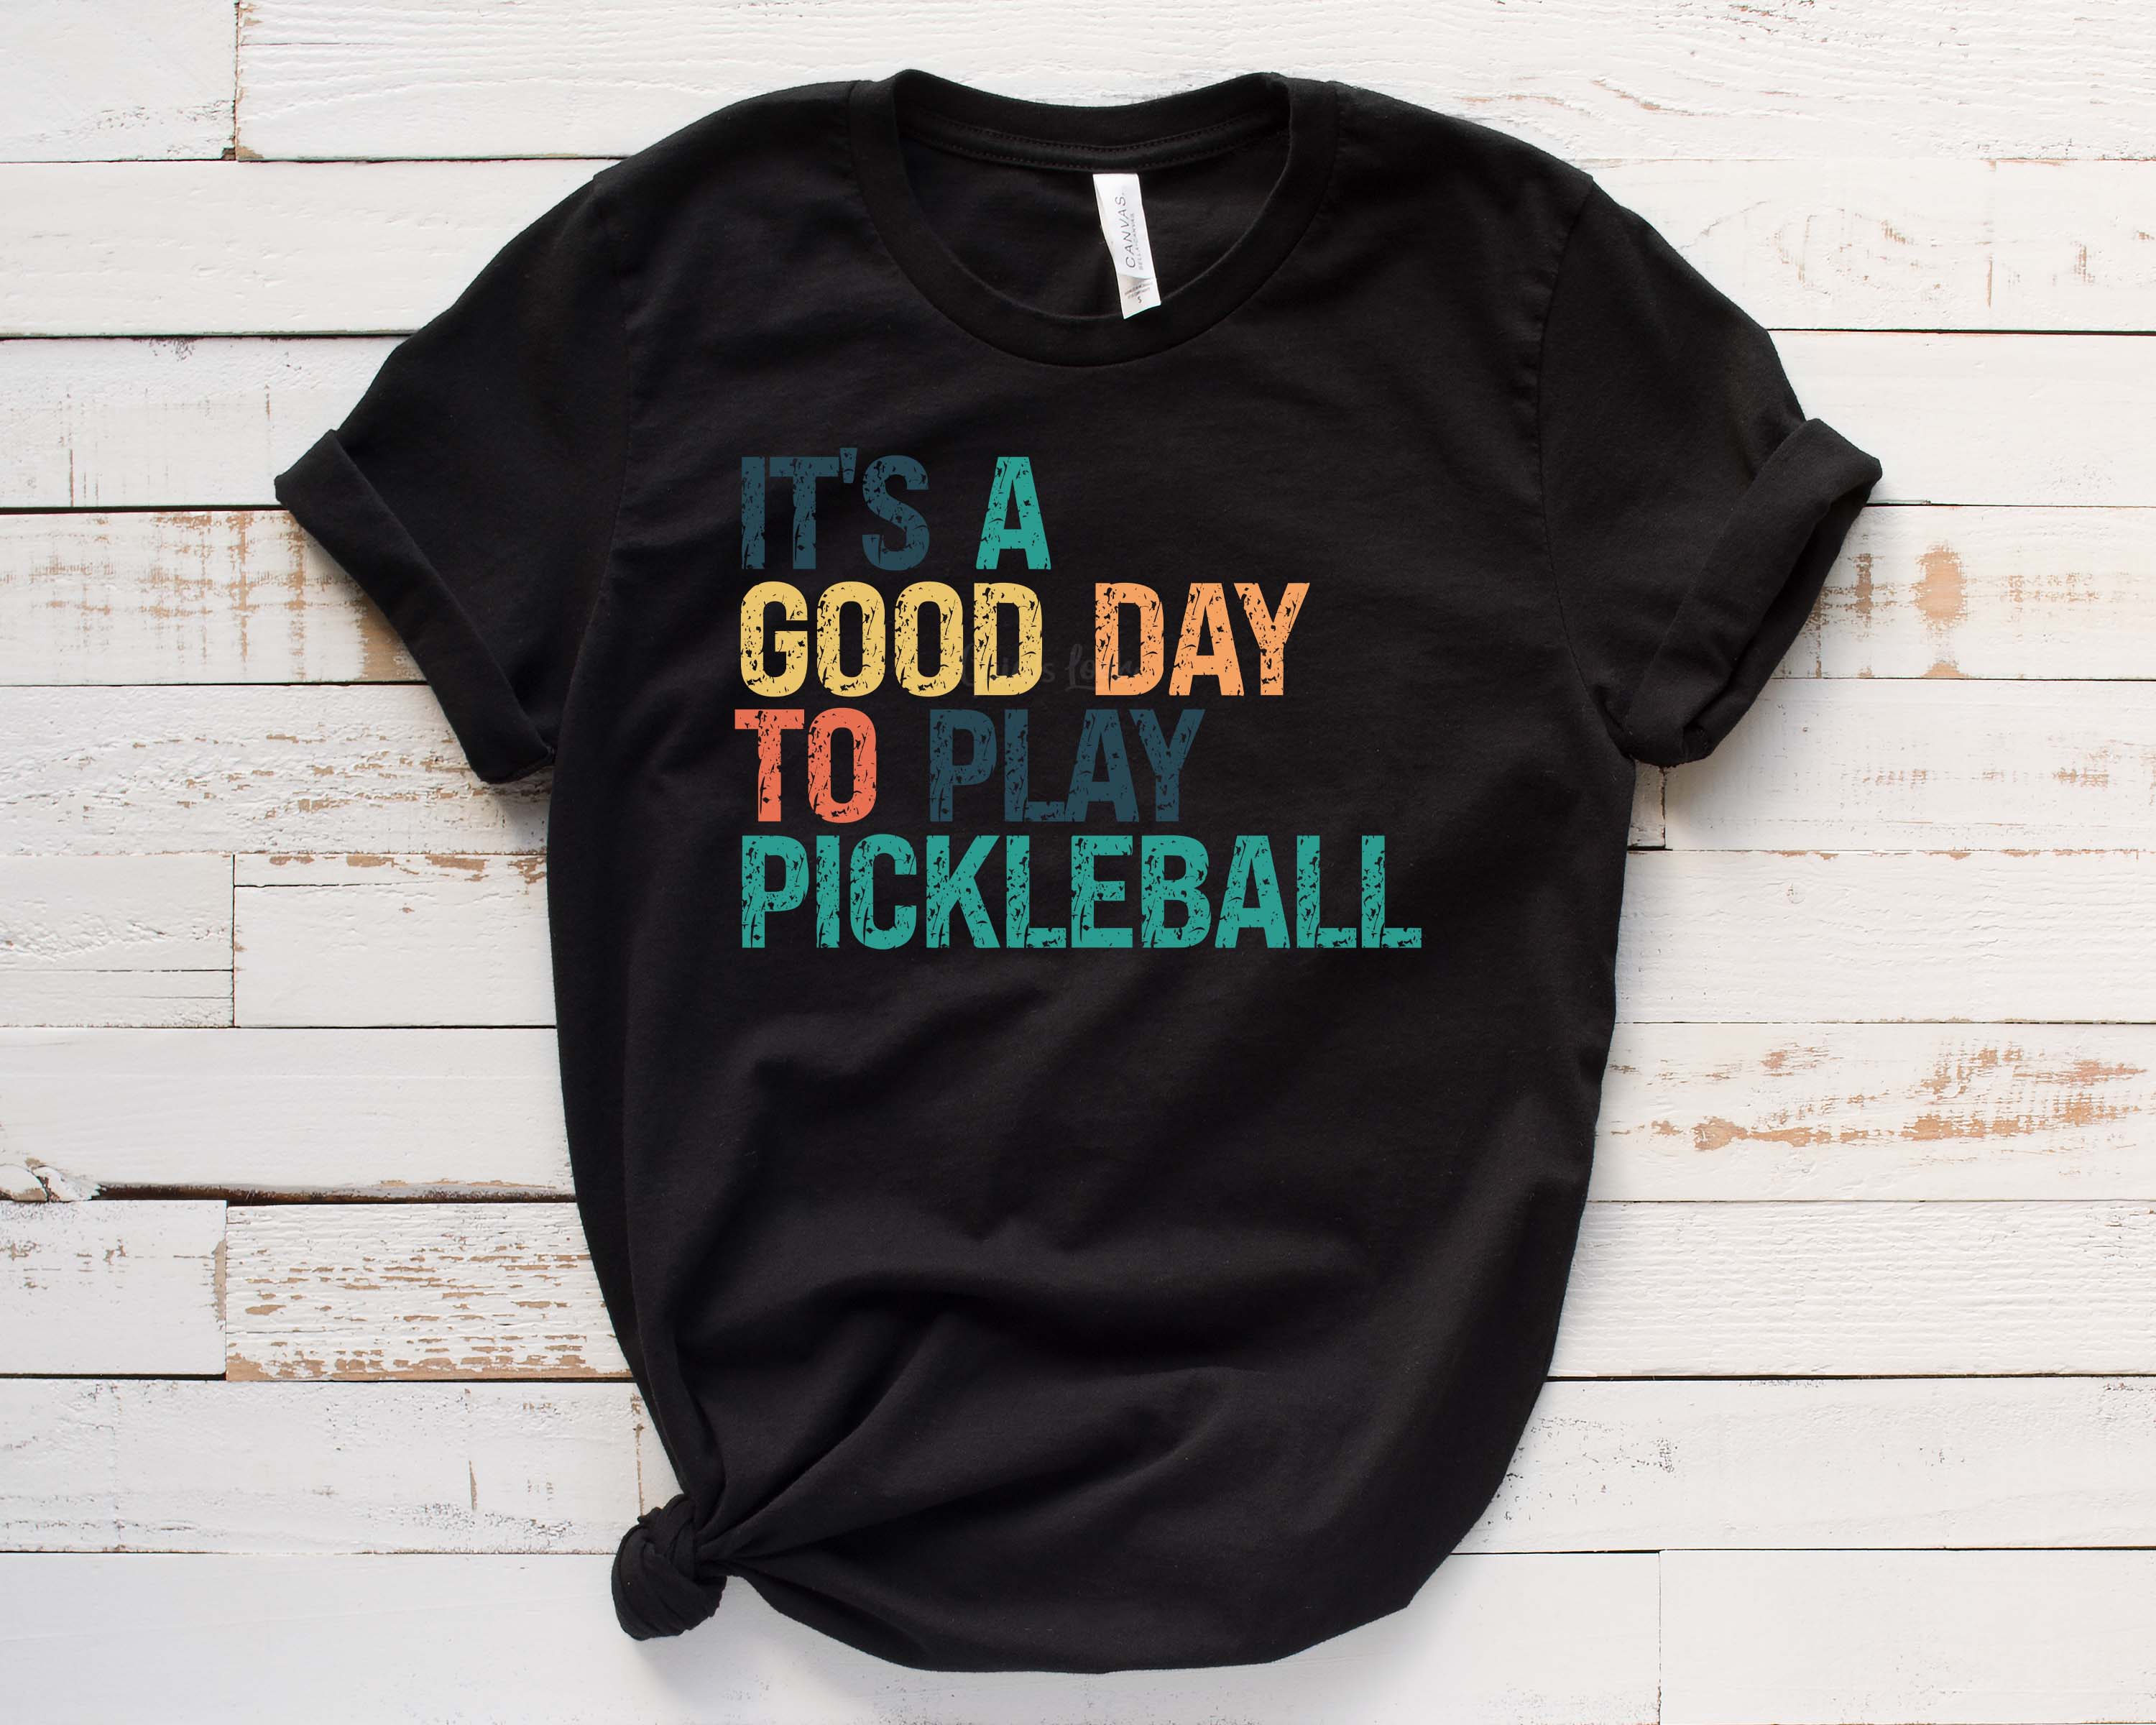 It's a good day to play pickleball black shirt